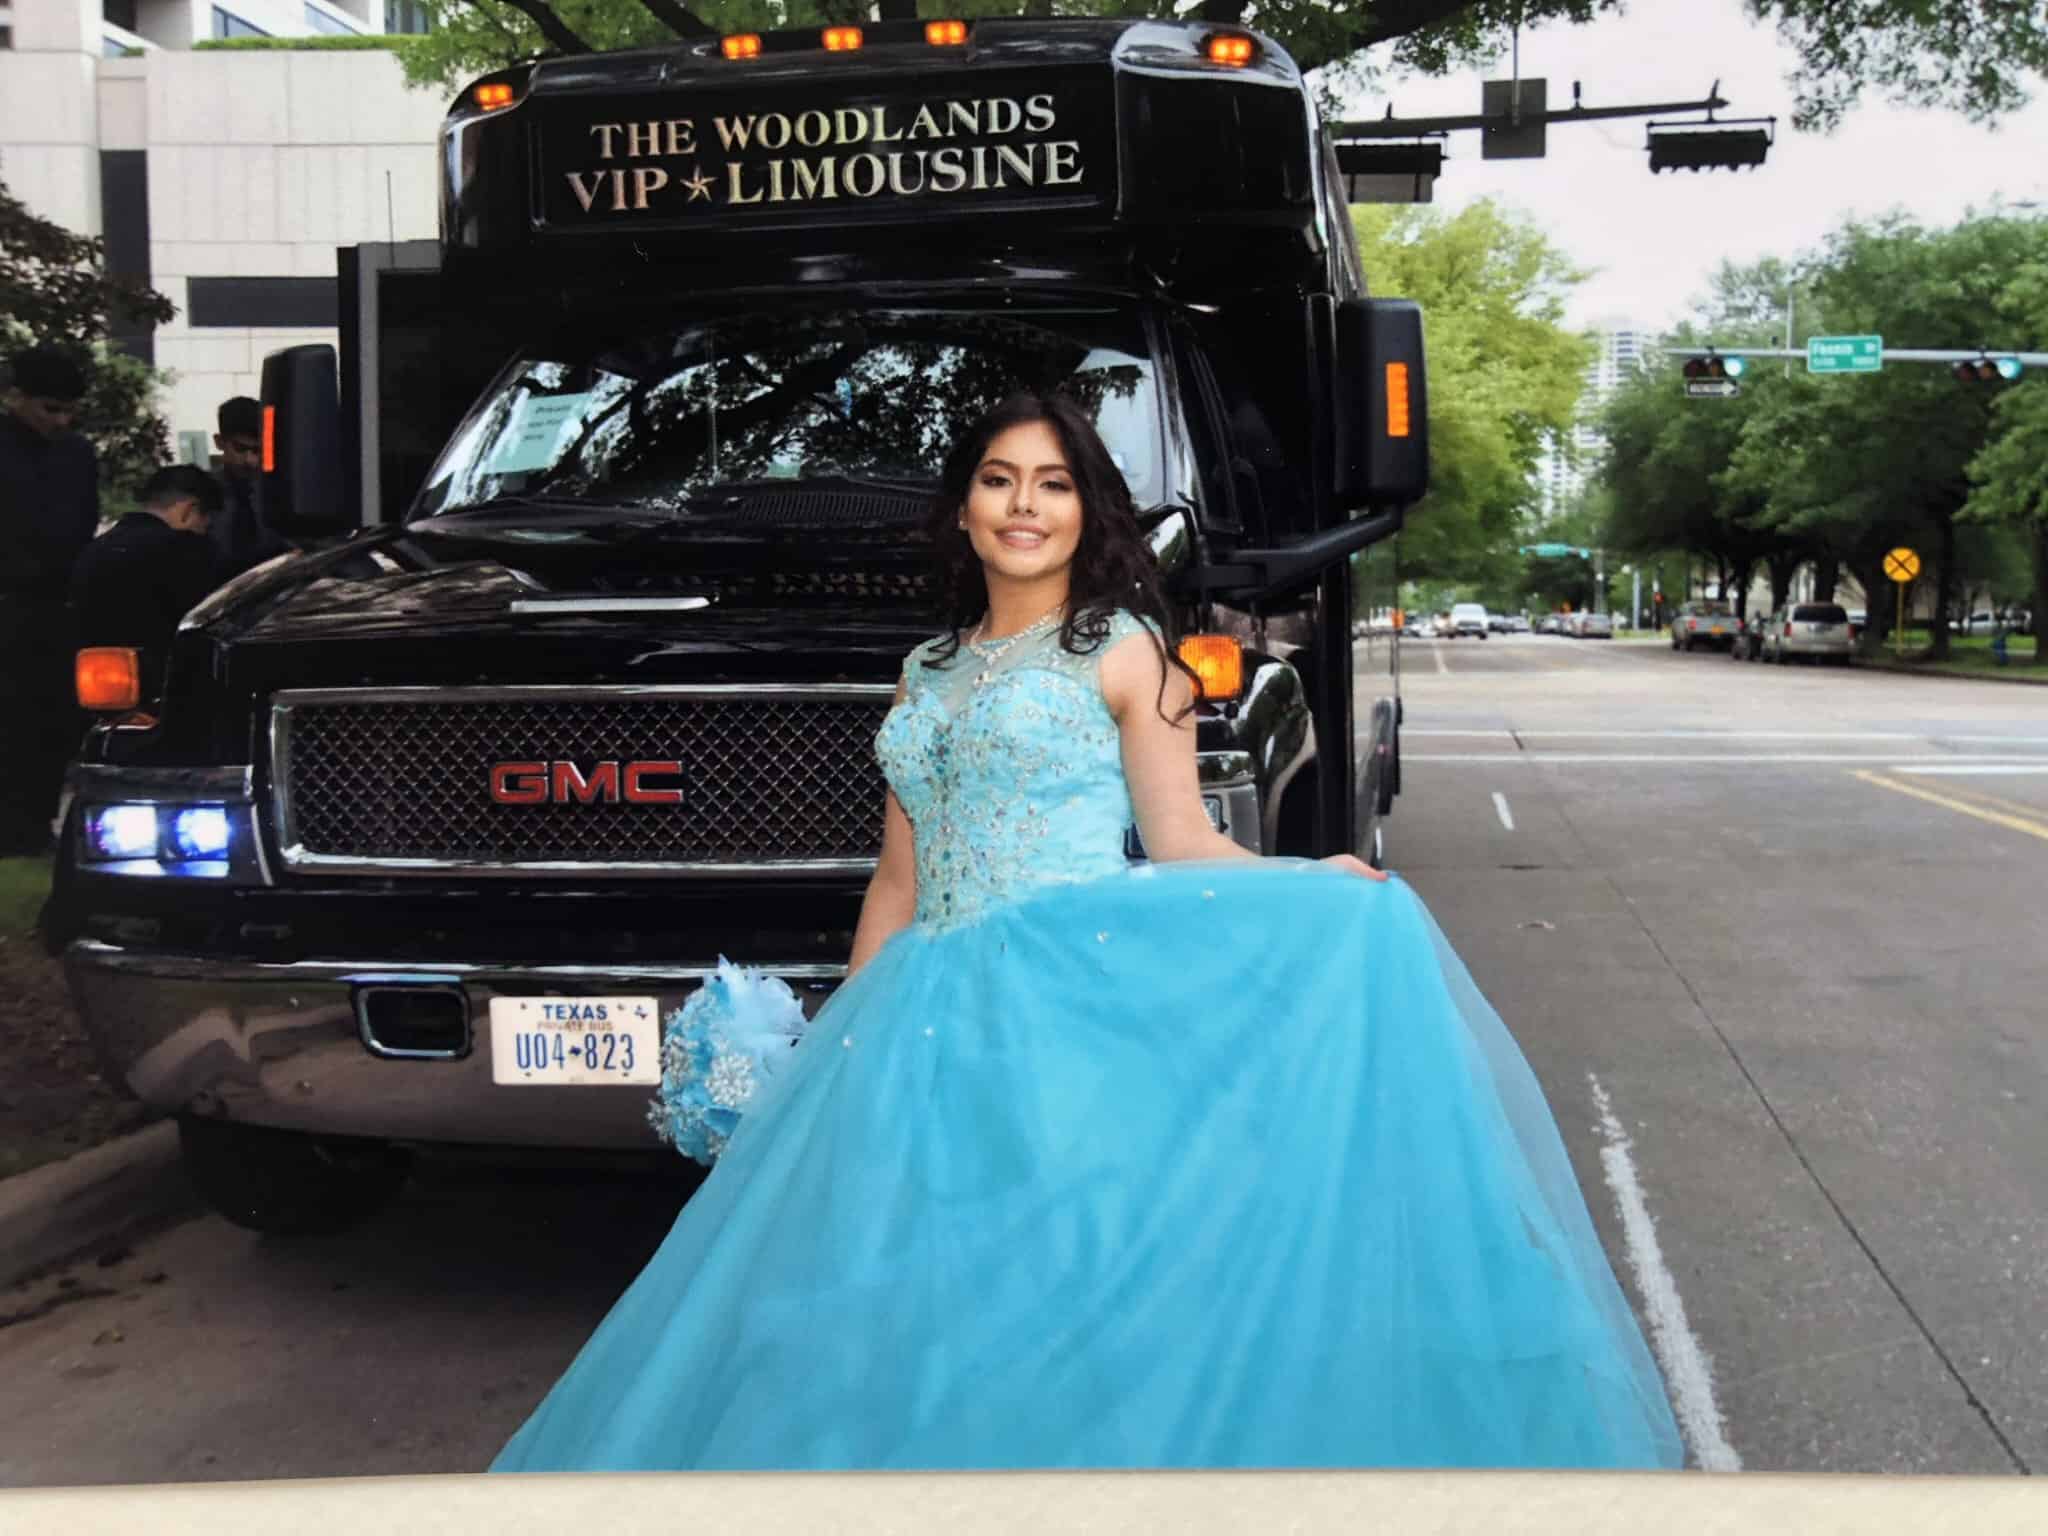 ABOUT THE WOODLANDS VIP LIMOUSINE SERVICE